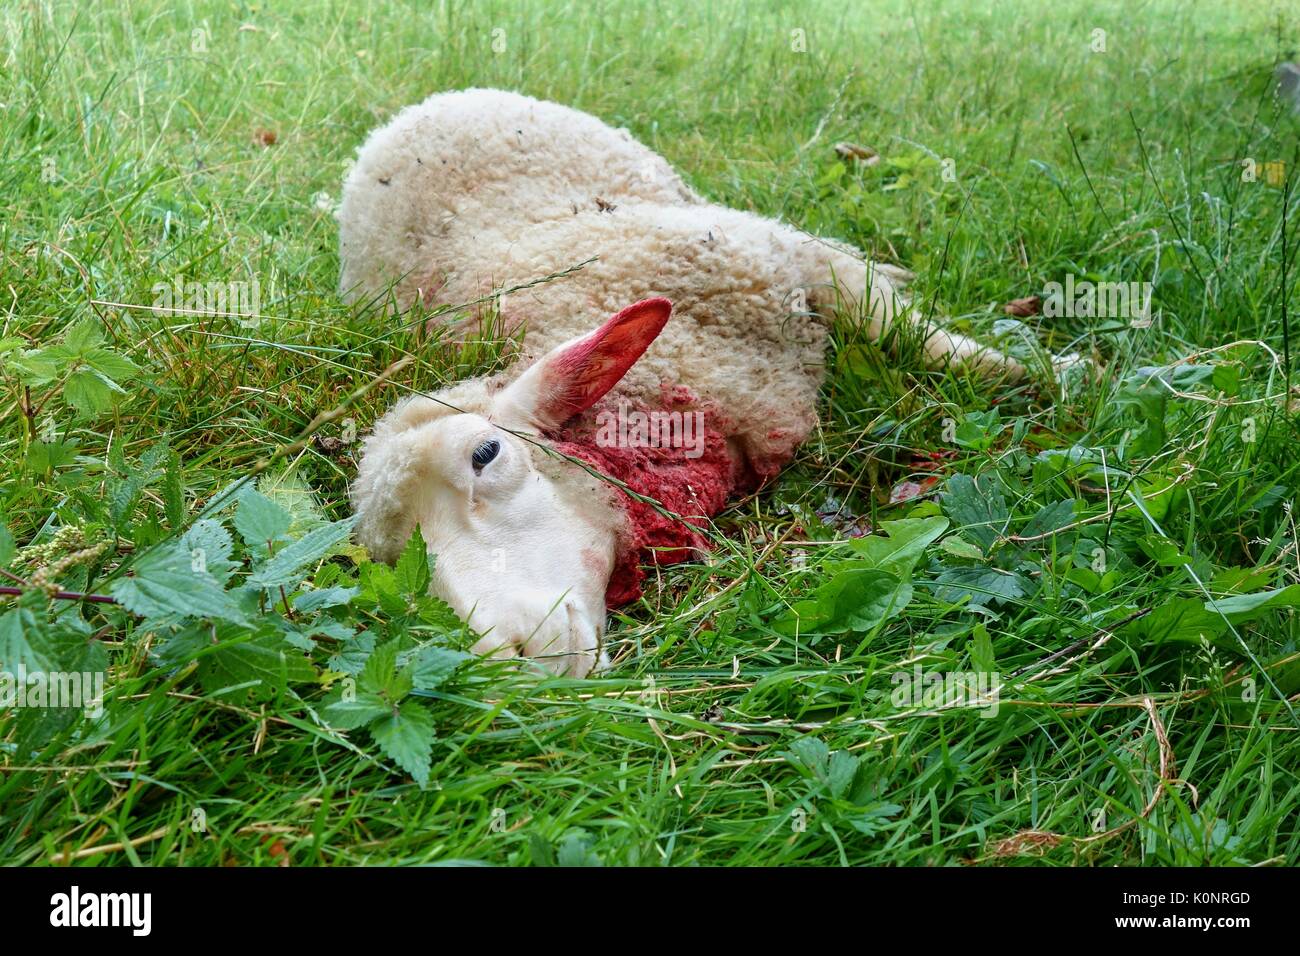 Killed sheep, Dog or wolf attack. Stock Photo